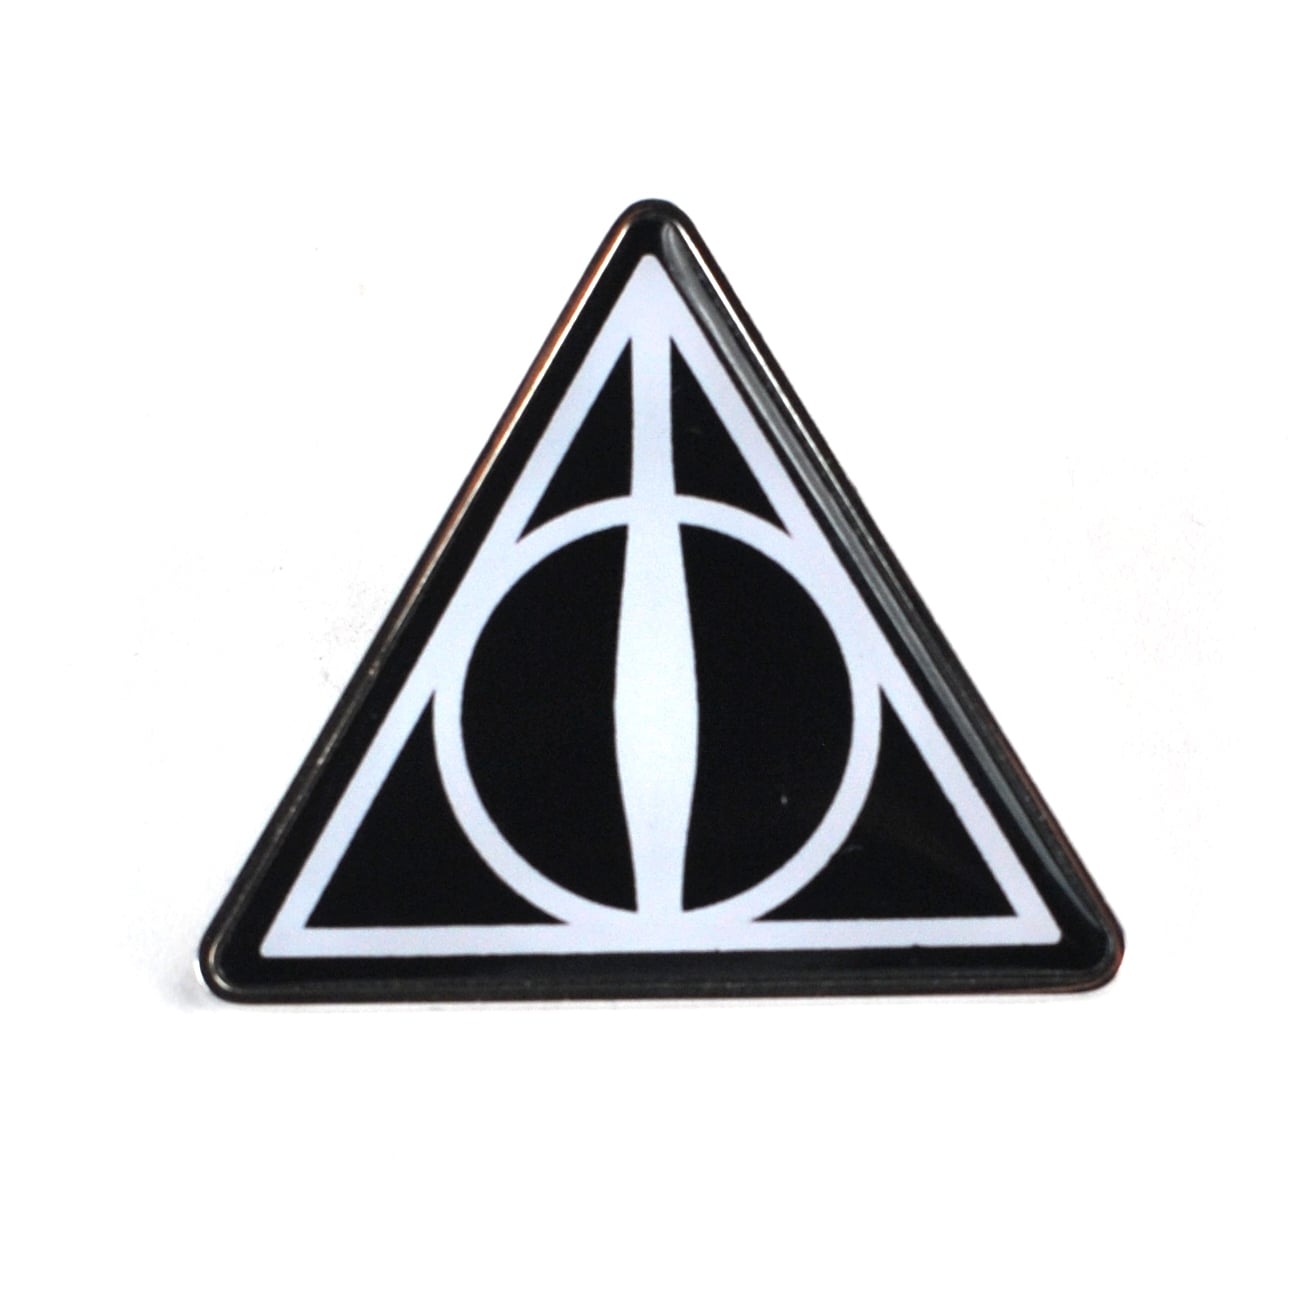 Deathly Hallows Pin Badge - Harry Potter Pin Badges